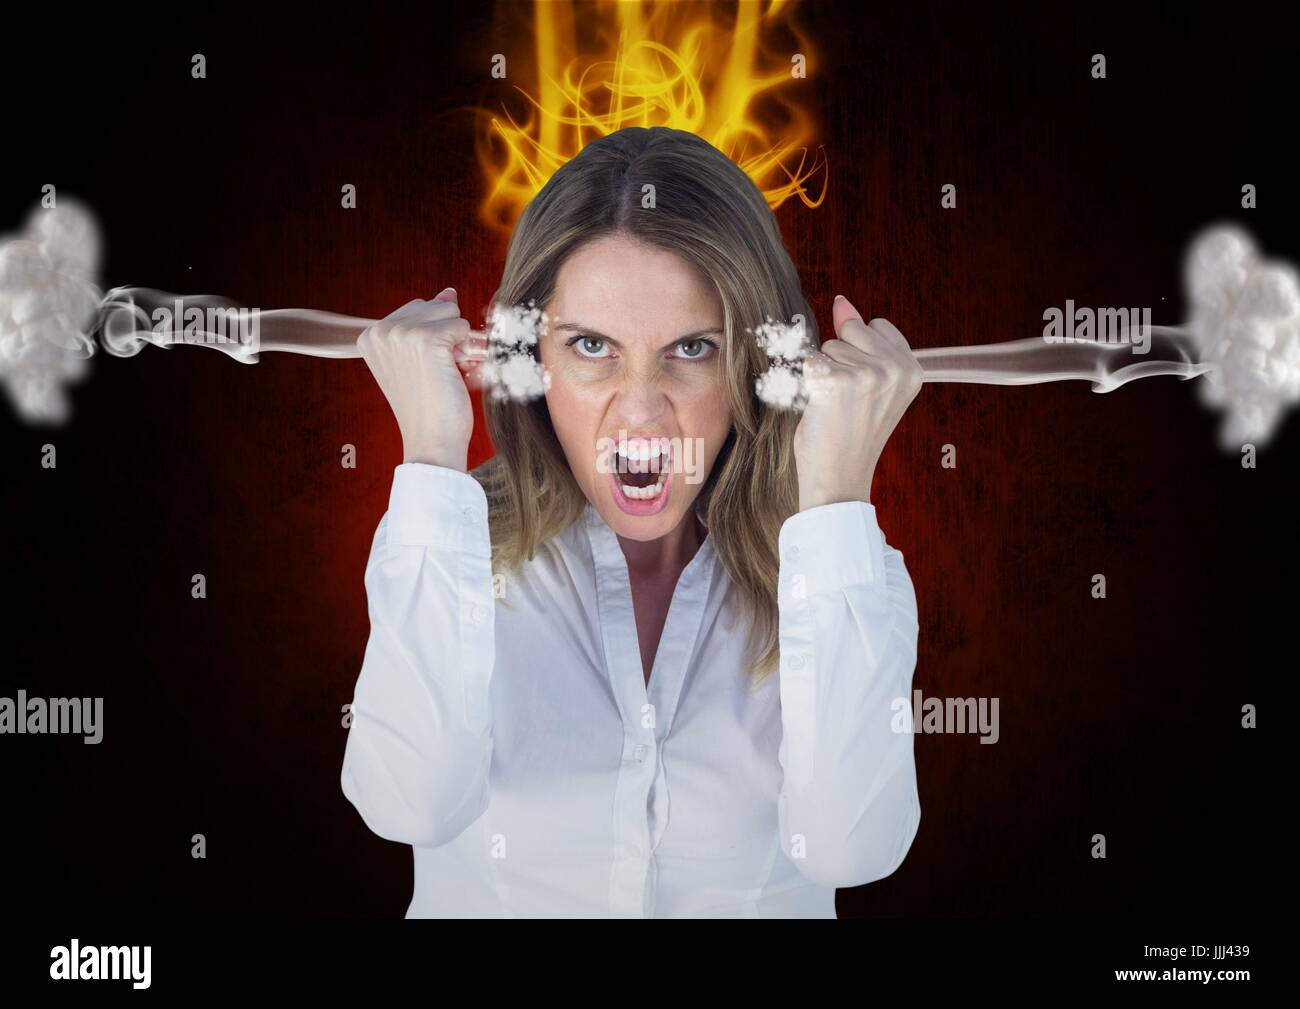 anger young woman shouting with 3d steam on ears and fire on head. Black background Stock Photo